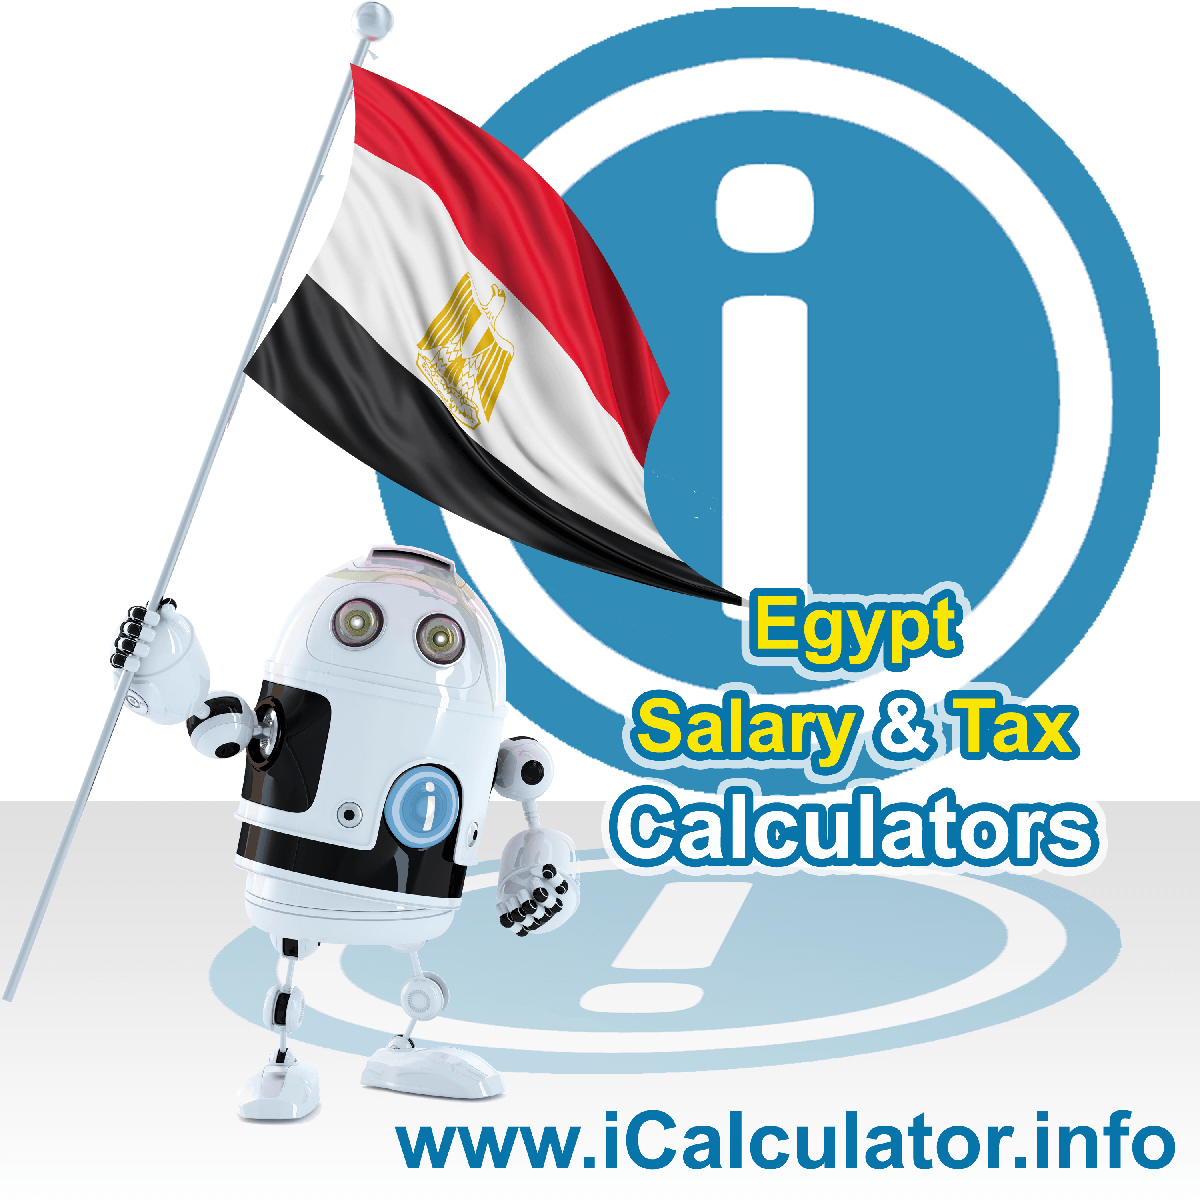 Egypt Tax Calculator. This image shows the Egypt flag and information relating to the tax formula for the Egypt Salary Calculator